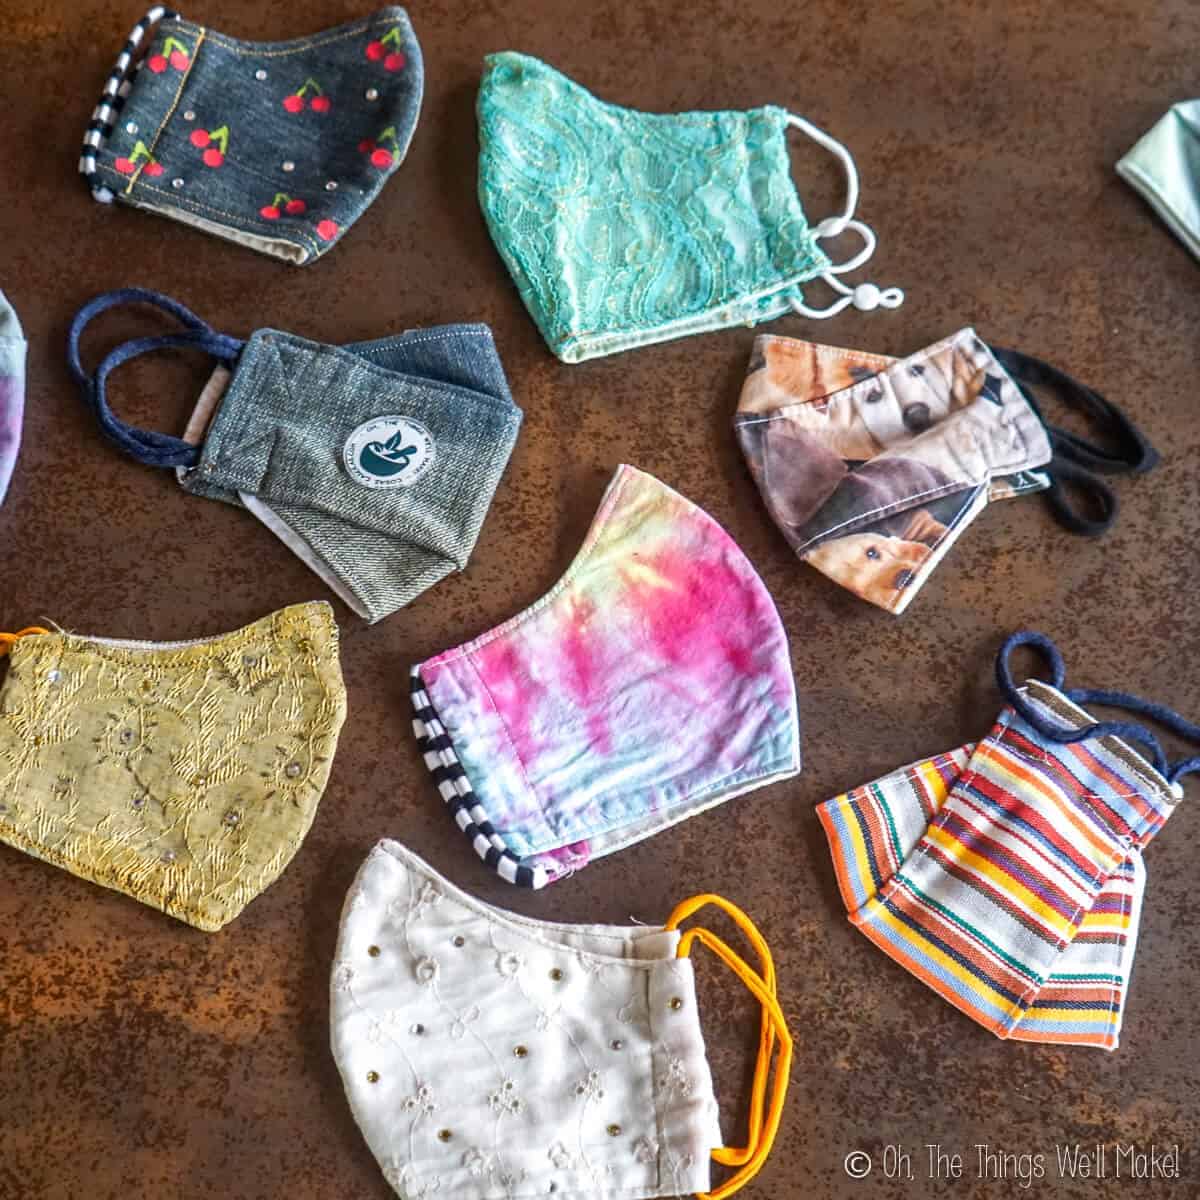 Overhead view of a variety of fun face masks, tie dyed masks, denim masks, lace masks, etc.